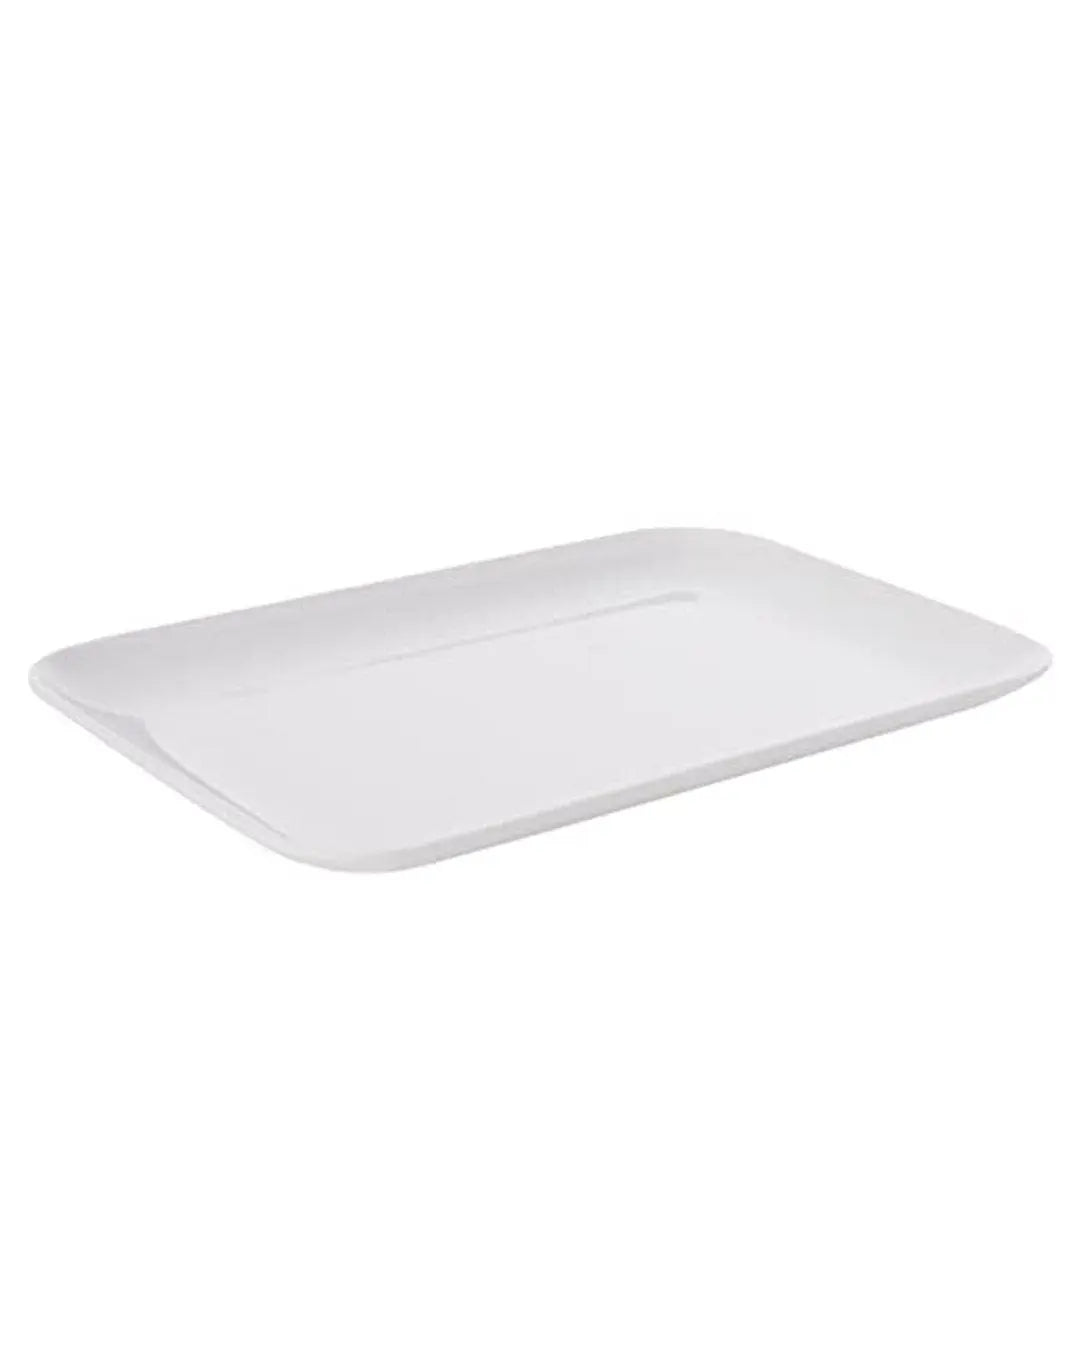 Rectangular White Plastic Tray Pack Size 3 Partyware 5033298005667